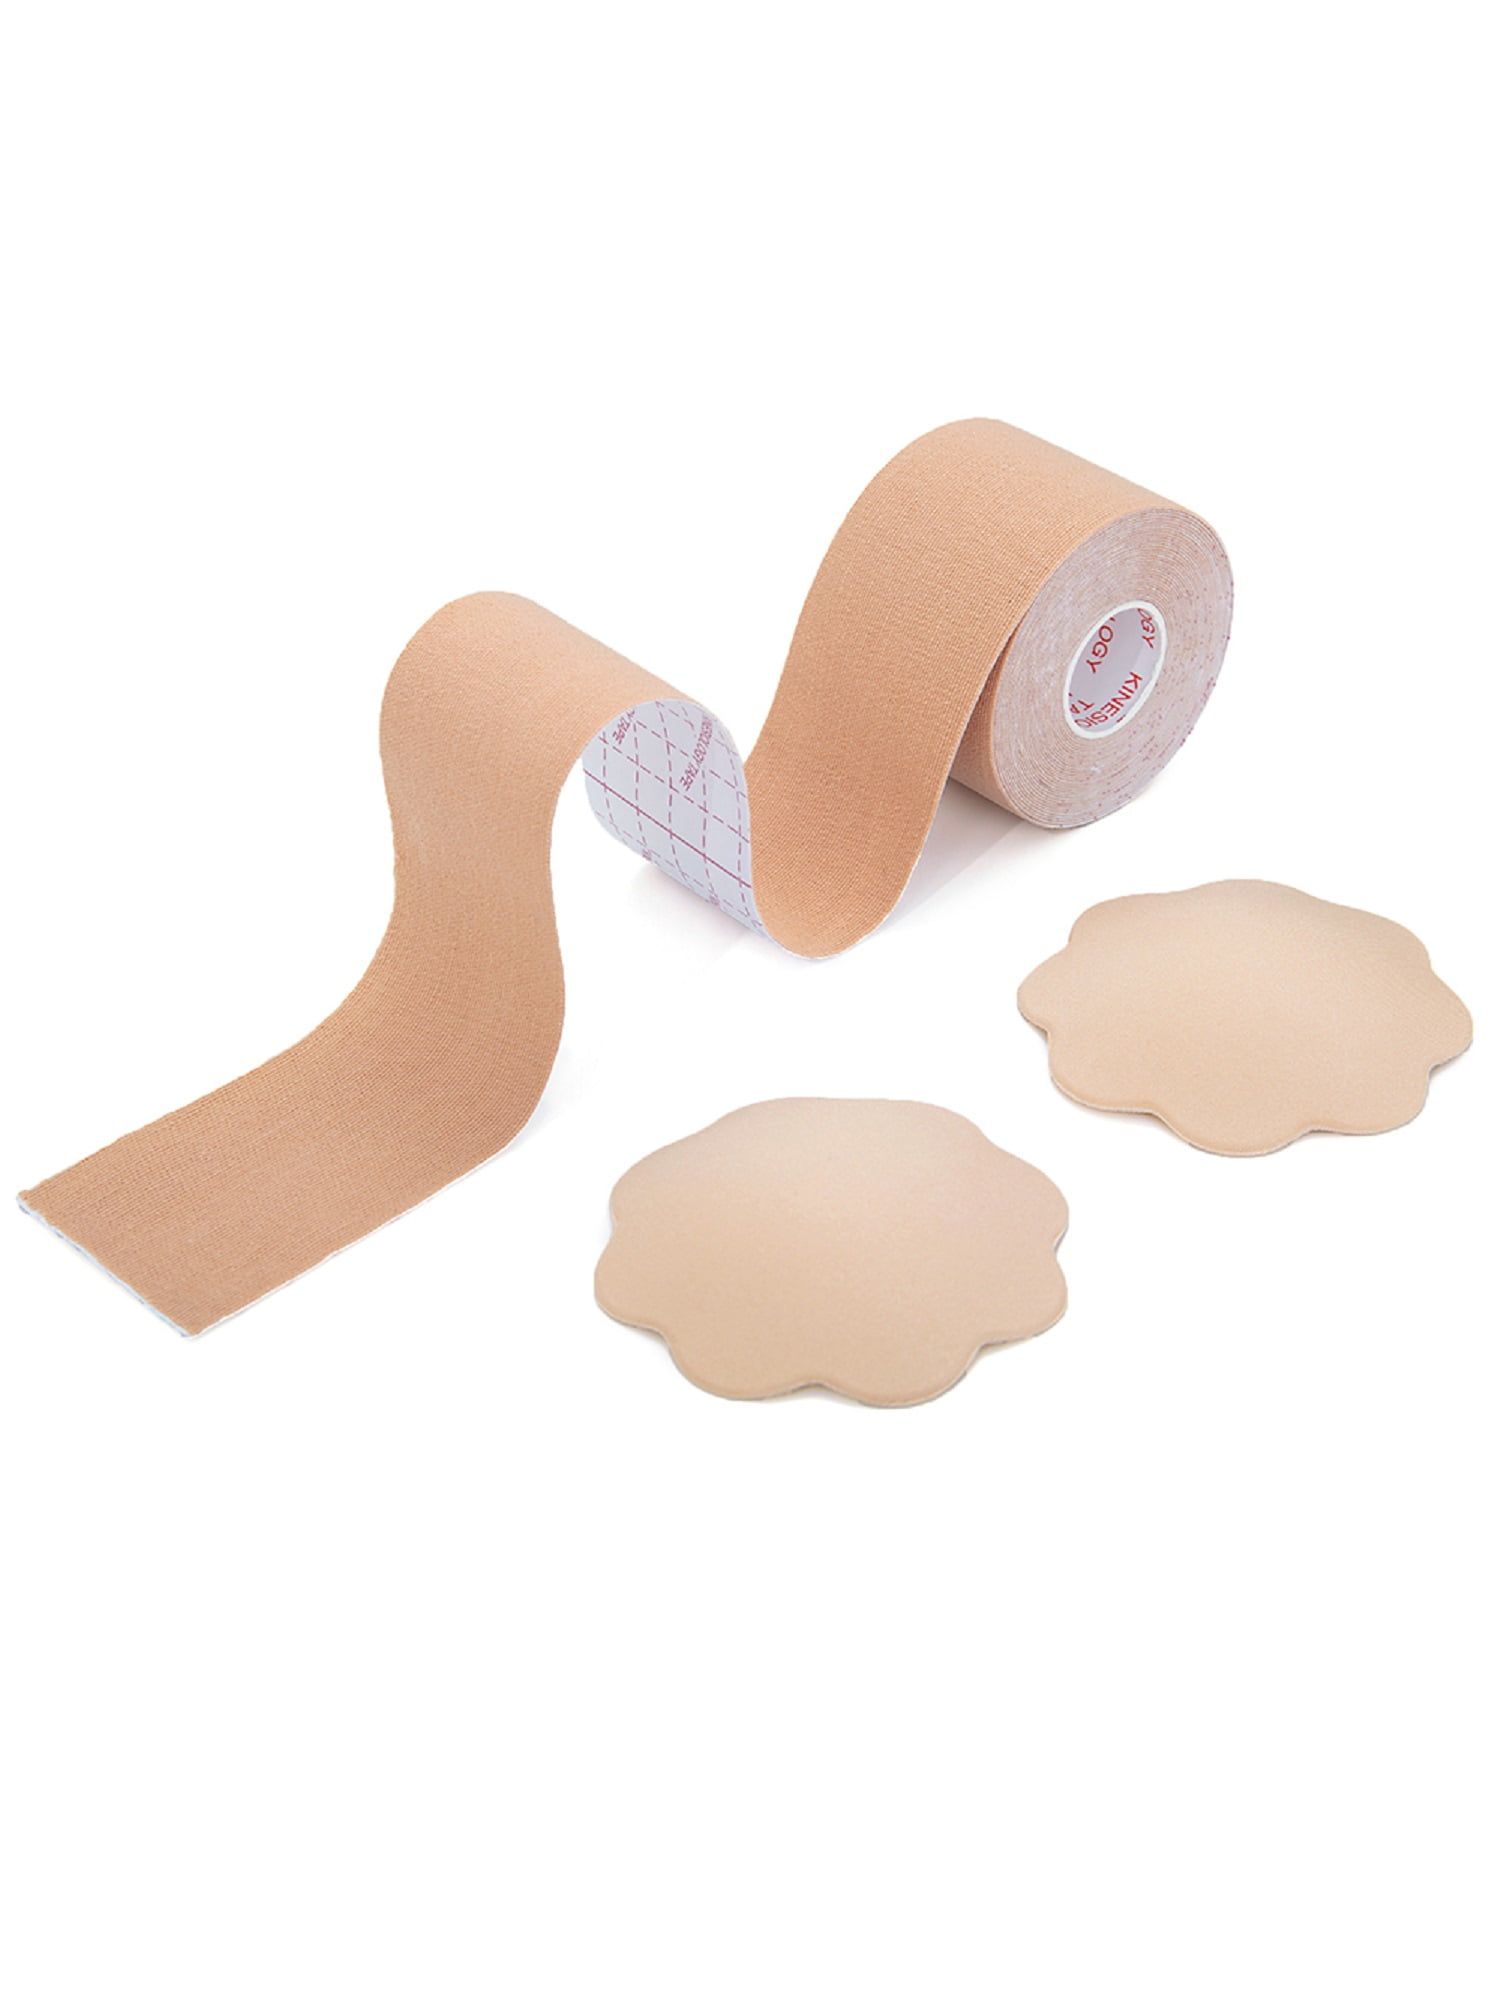 Lift & Cover Kit, [5 Pairs] Nipple Covers [1 Roll] Lift Tape, Nude Silicone  Nipple Pasties & Breast Lifting Tape For Strapless Dresses & Braless